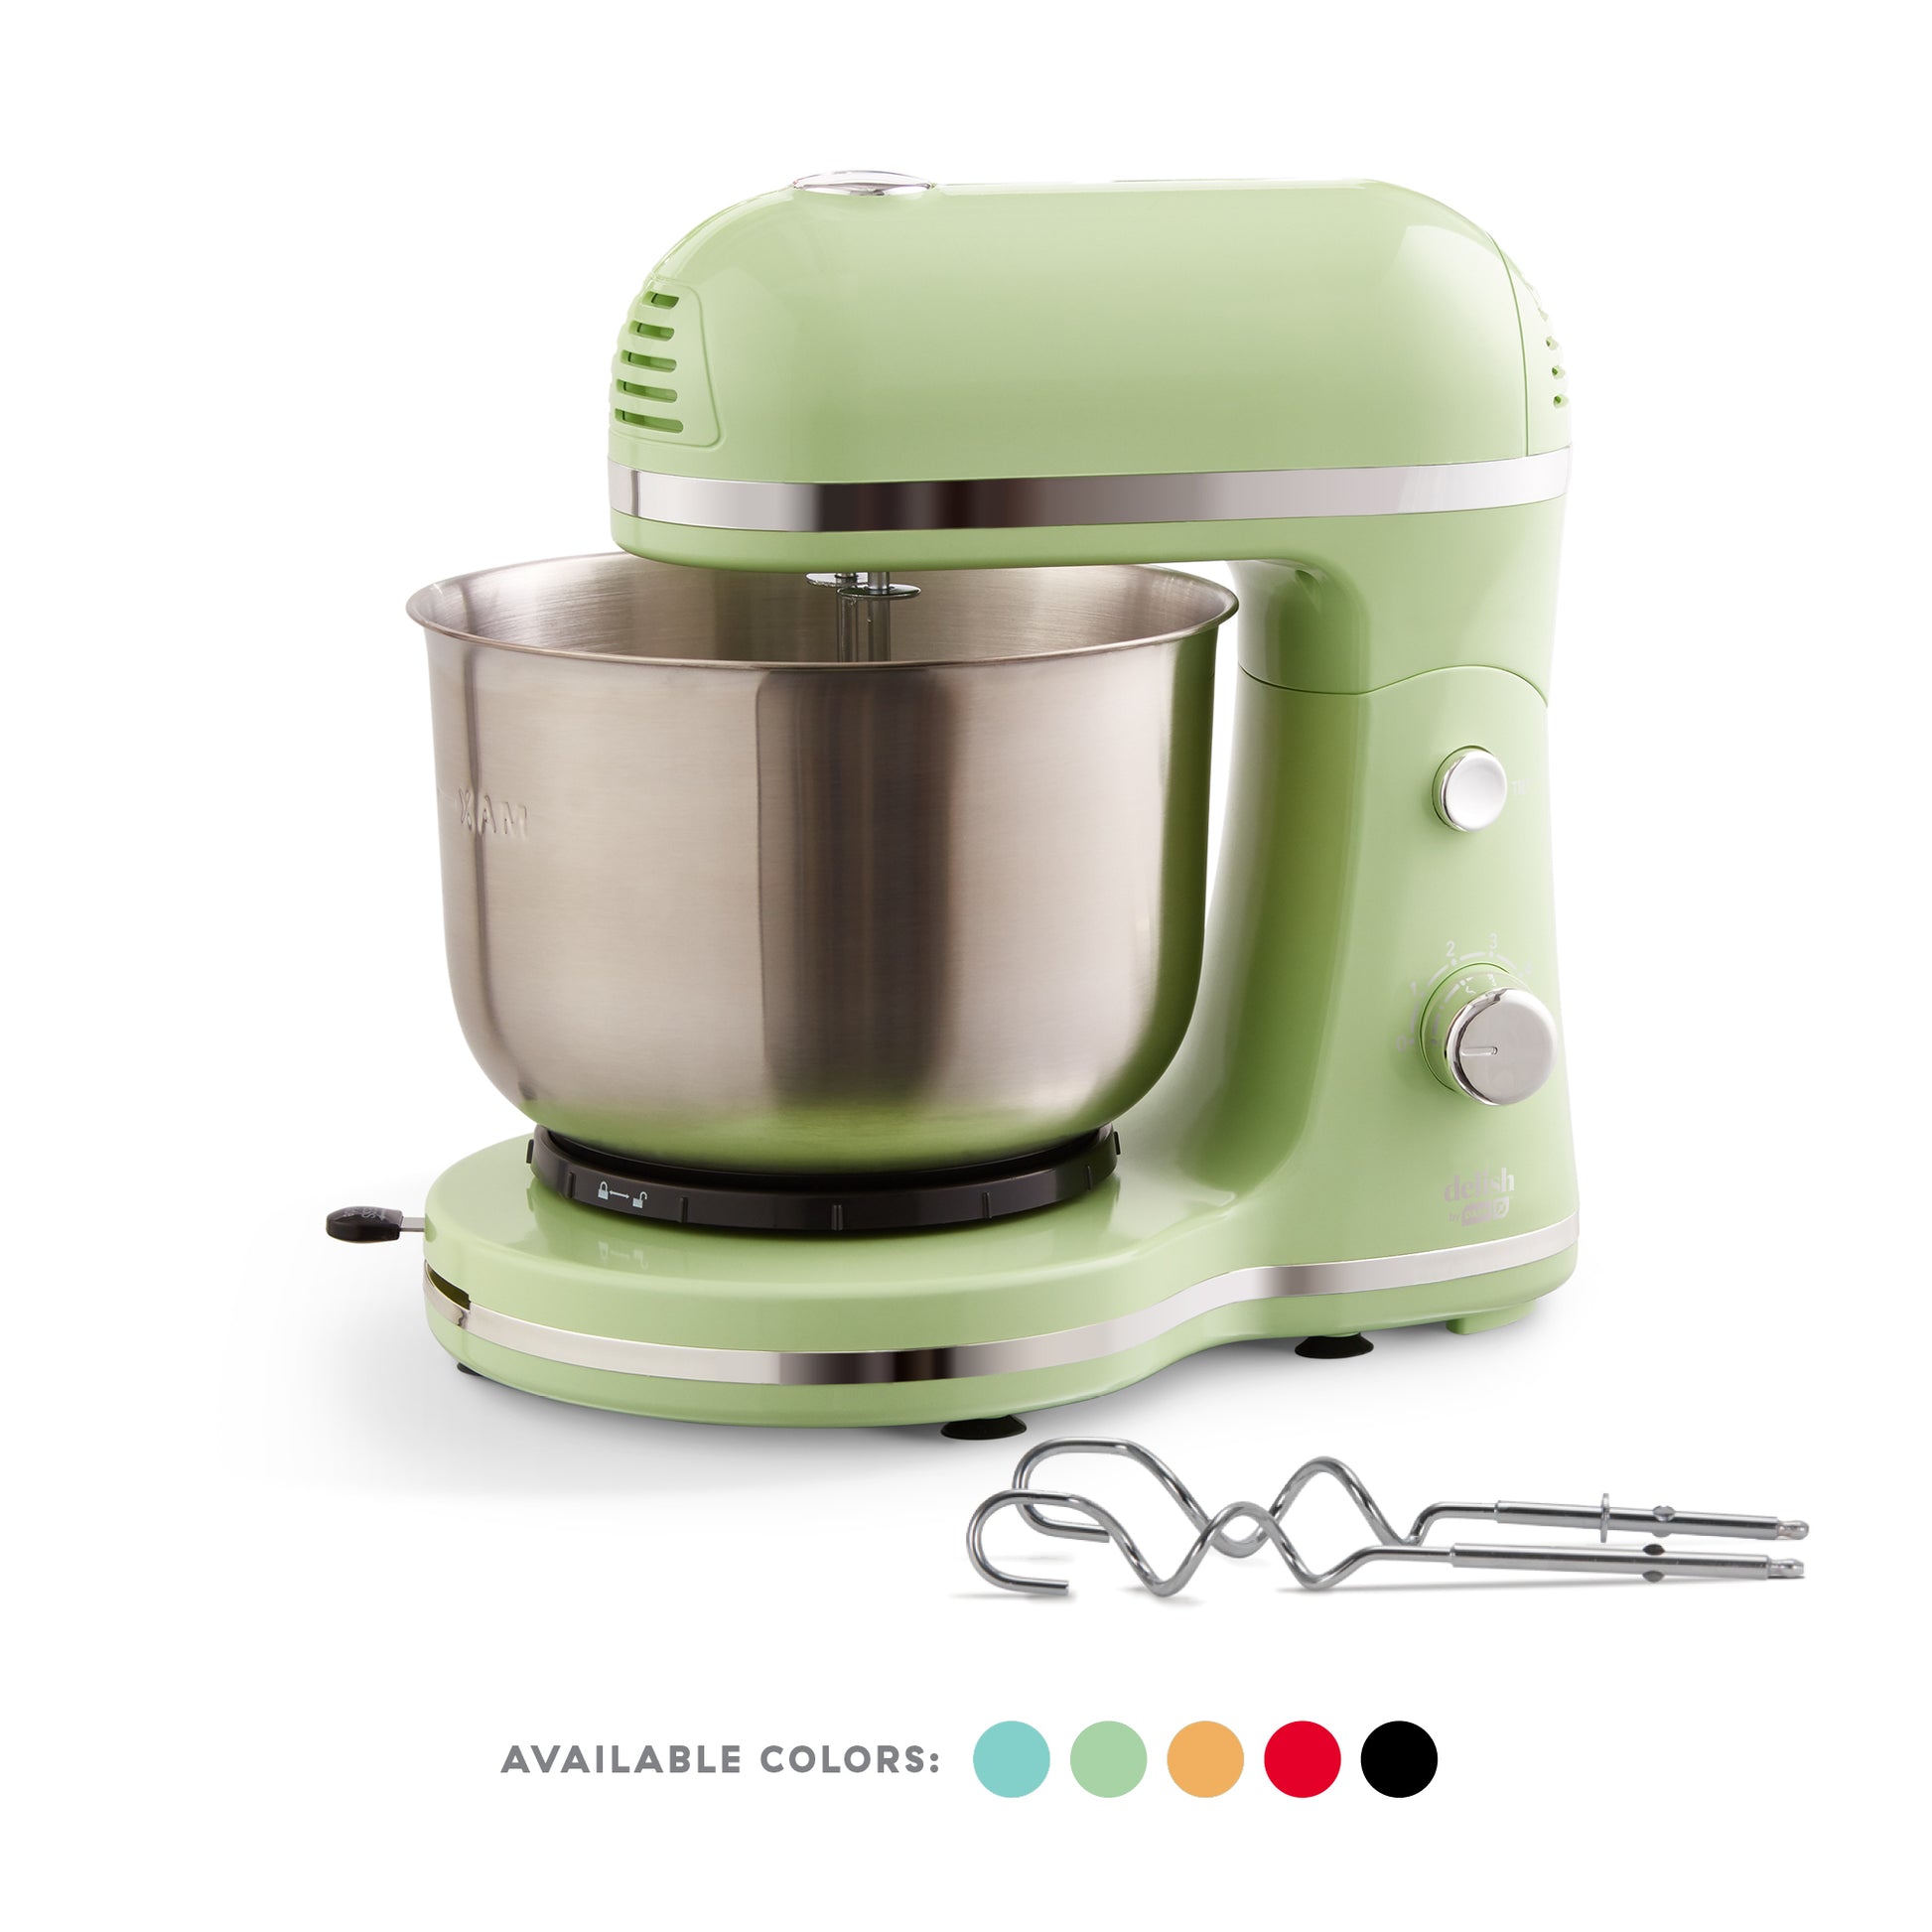 The best affordable stand mixer is the Dash Everyday Mixer